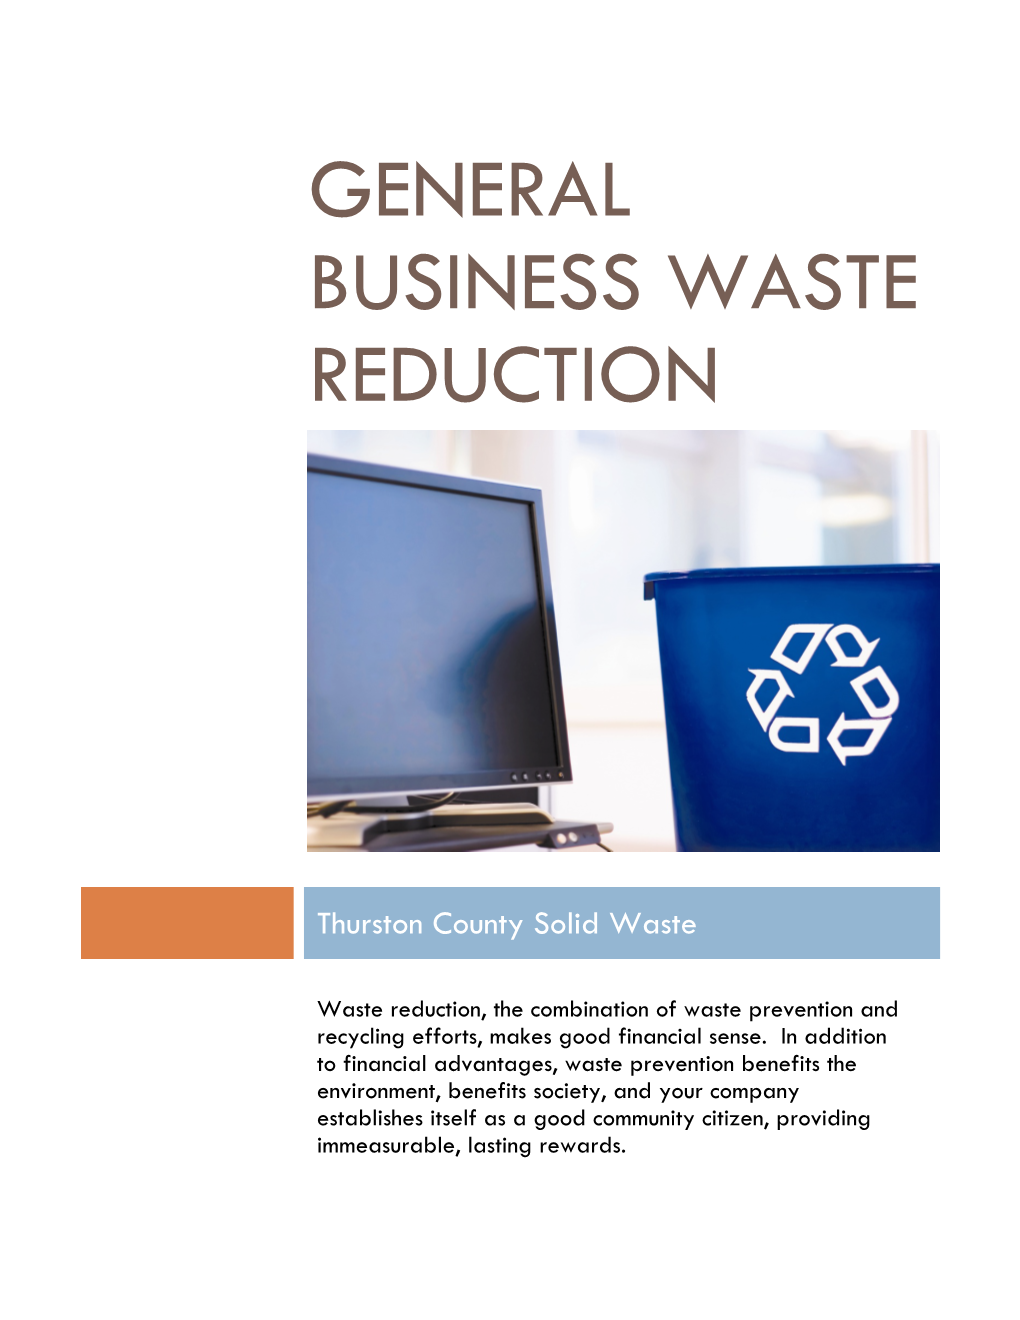 General Business Waste Reduction